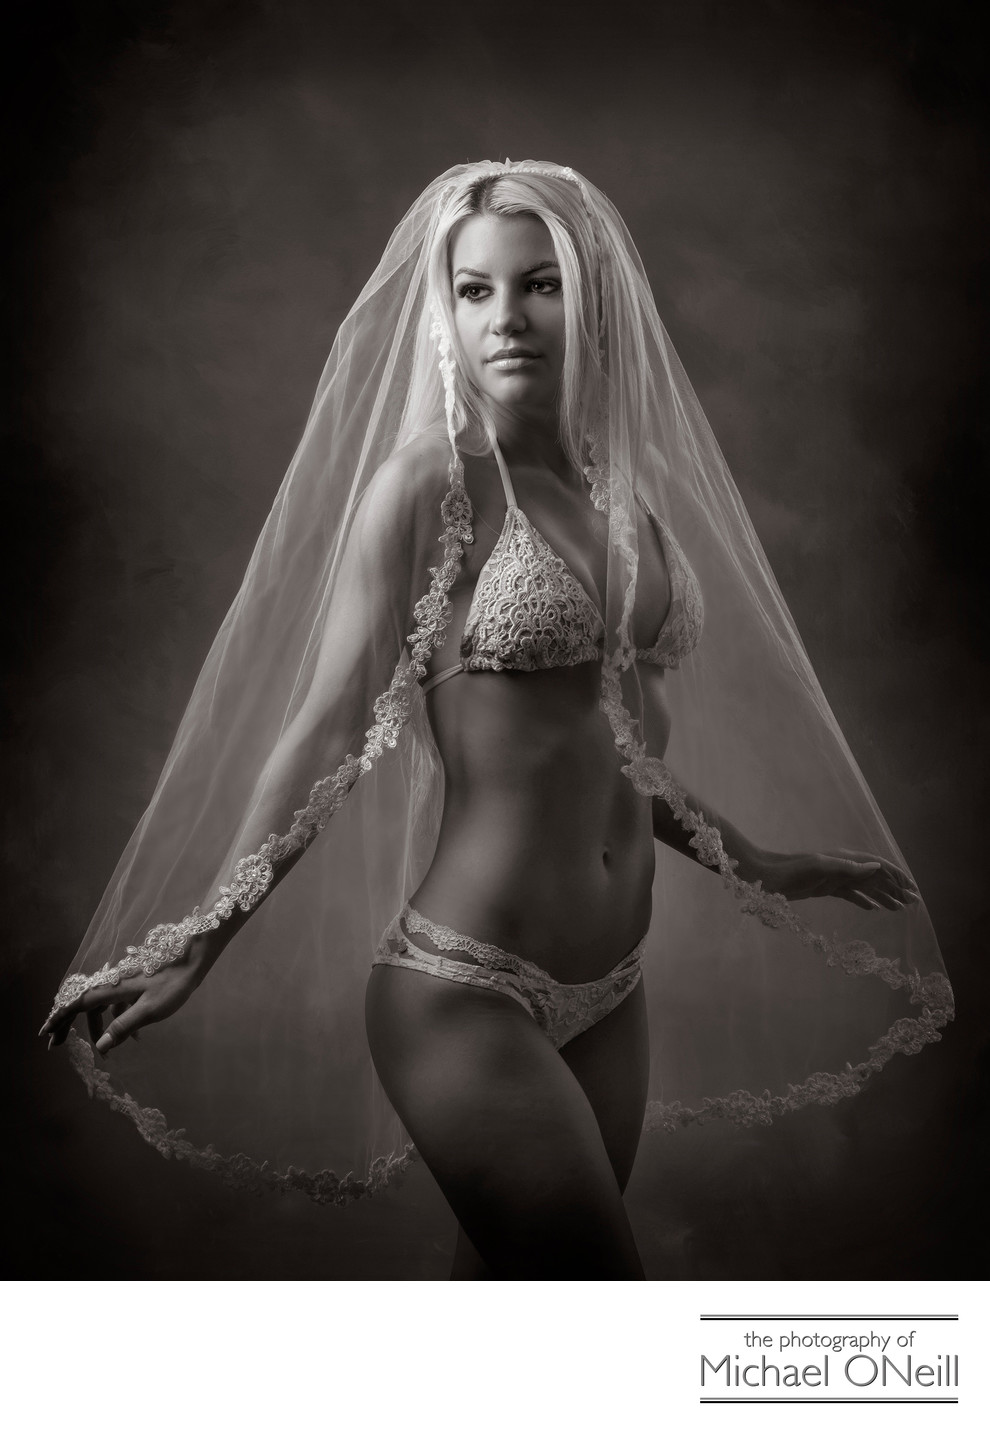 Bridal Boudoir The Perfect Bride’s Gift To Groom.